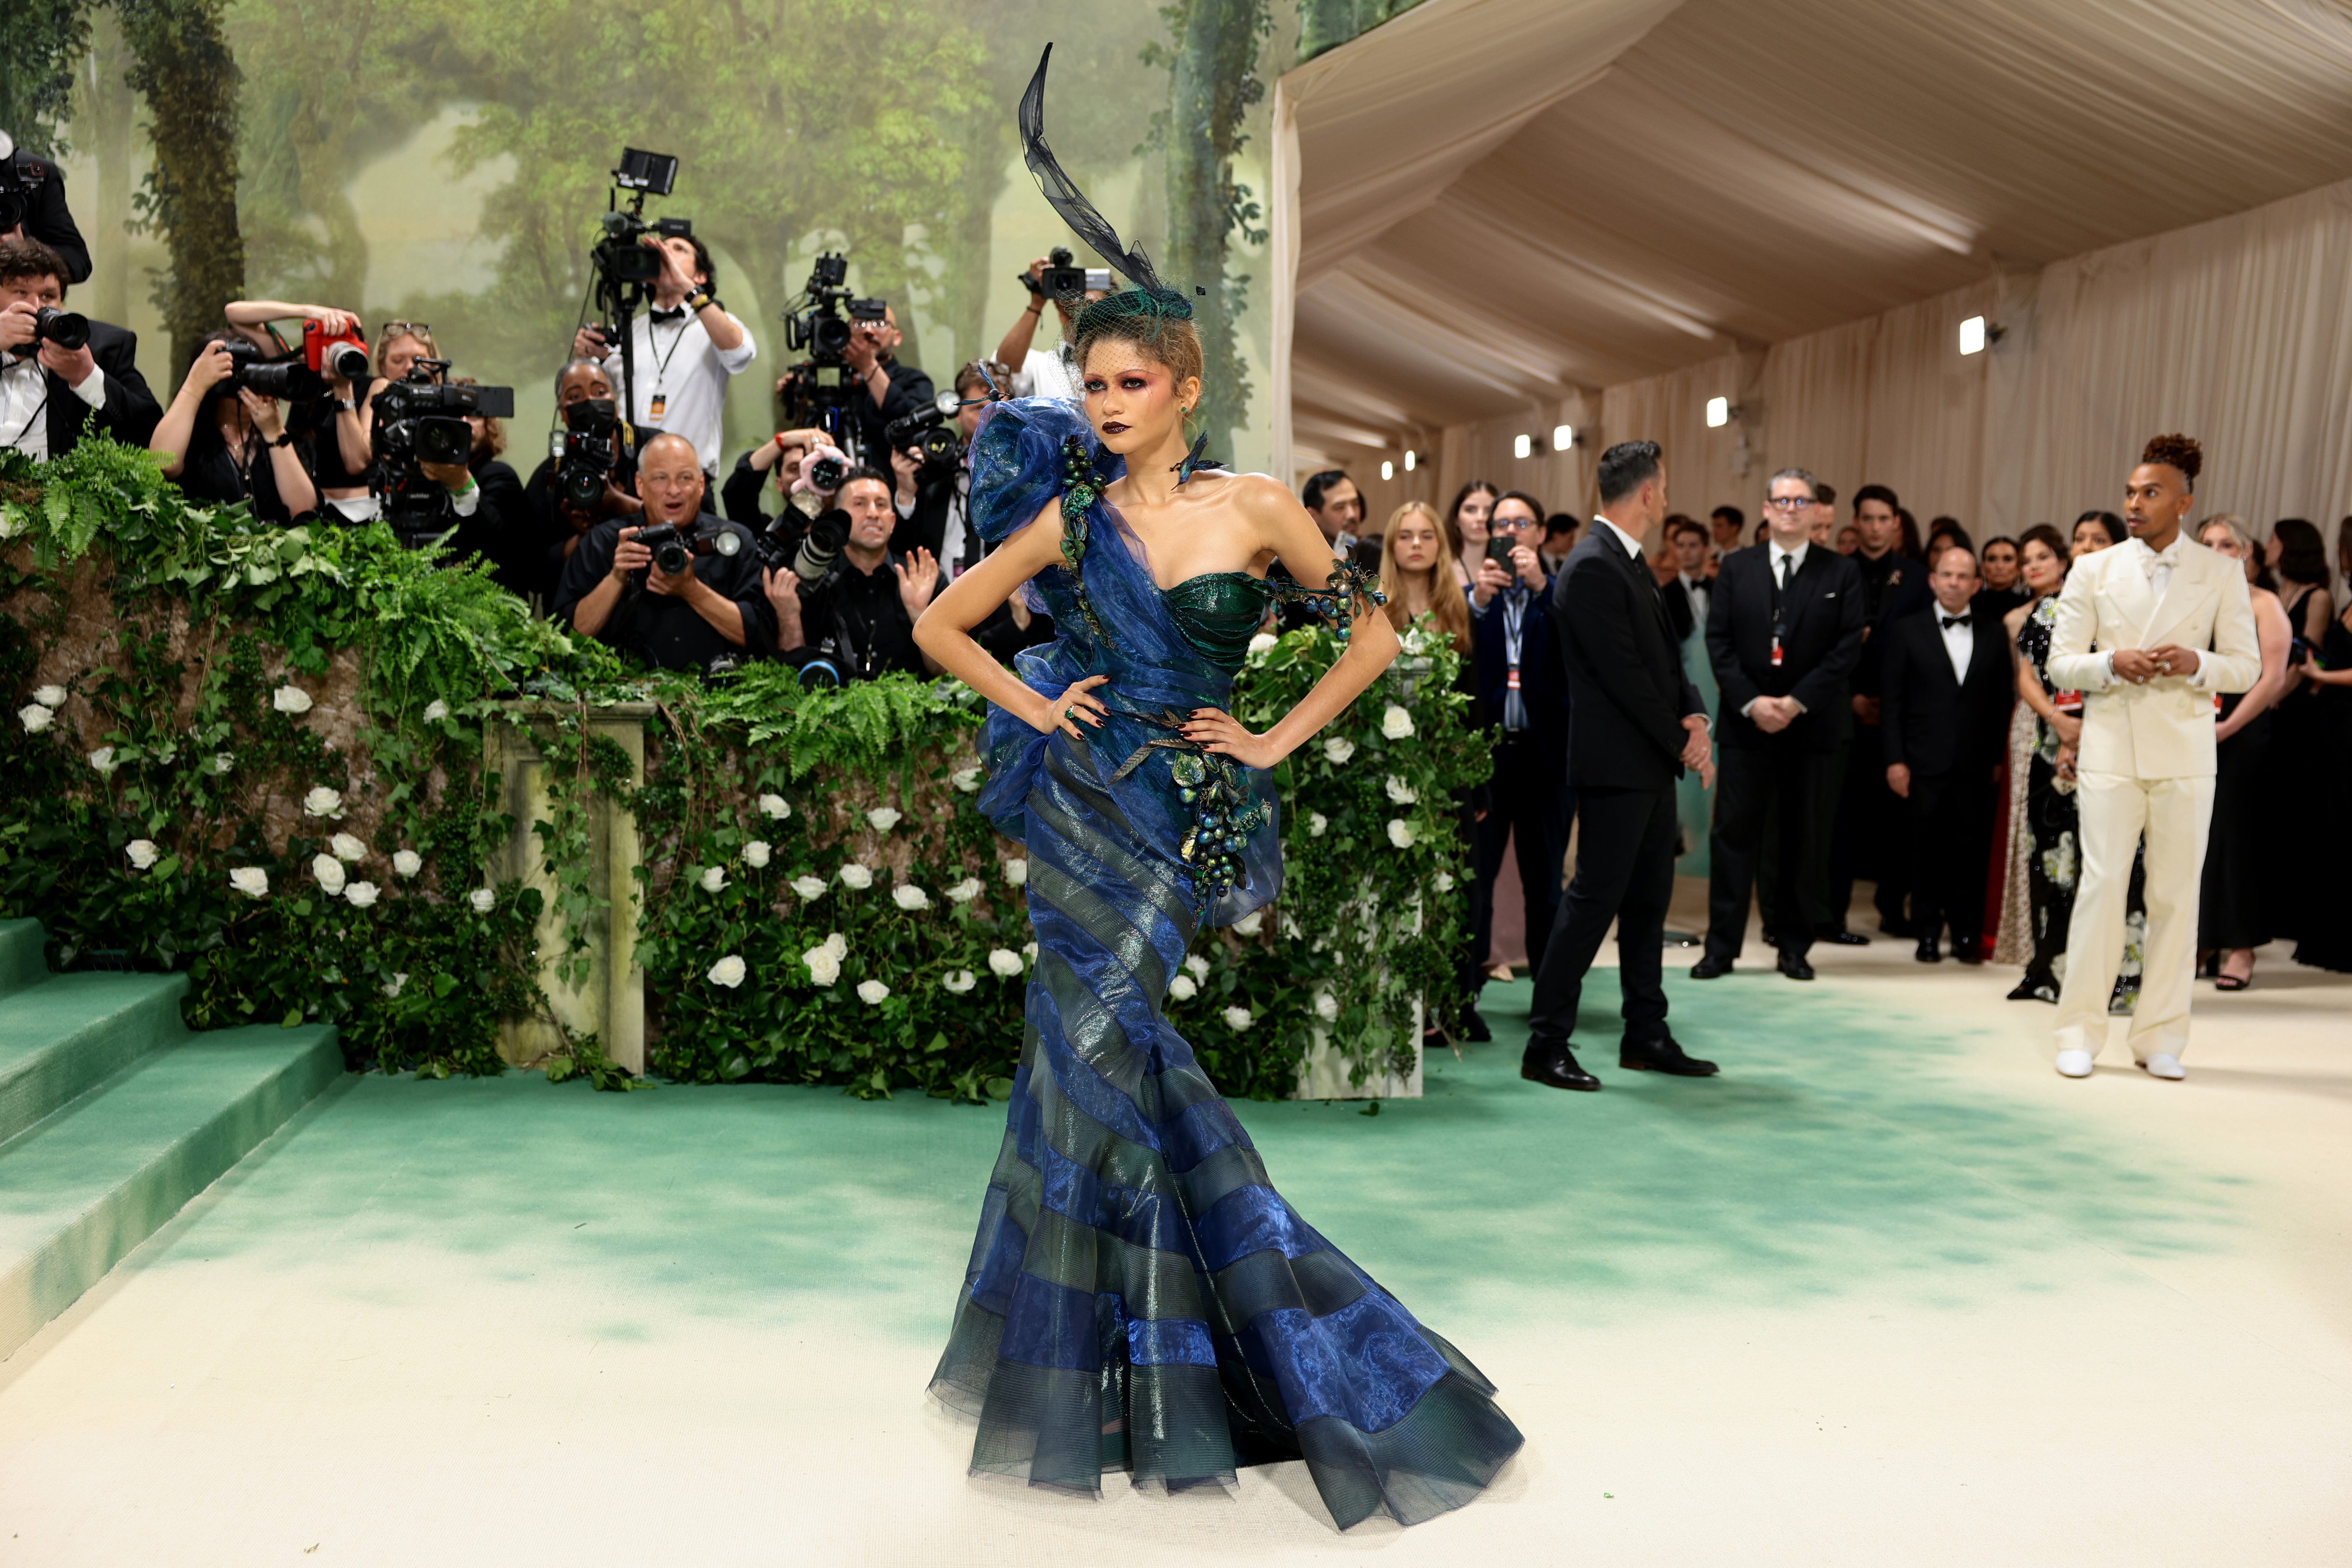 Zendaya wearing a structured, ocean-inspired couture gown at an event